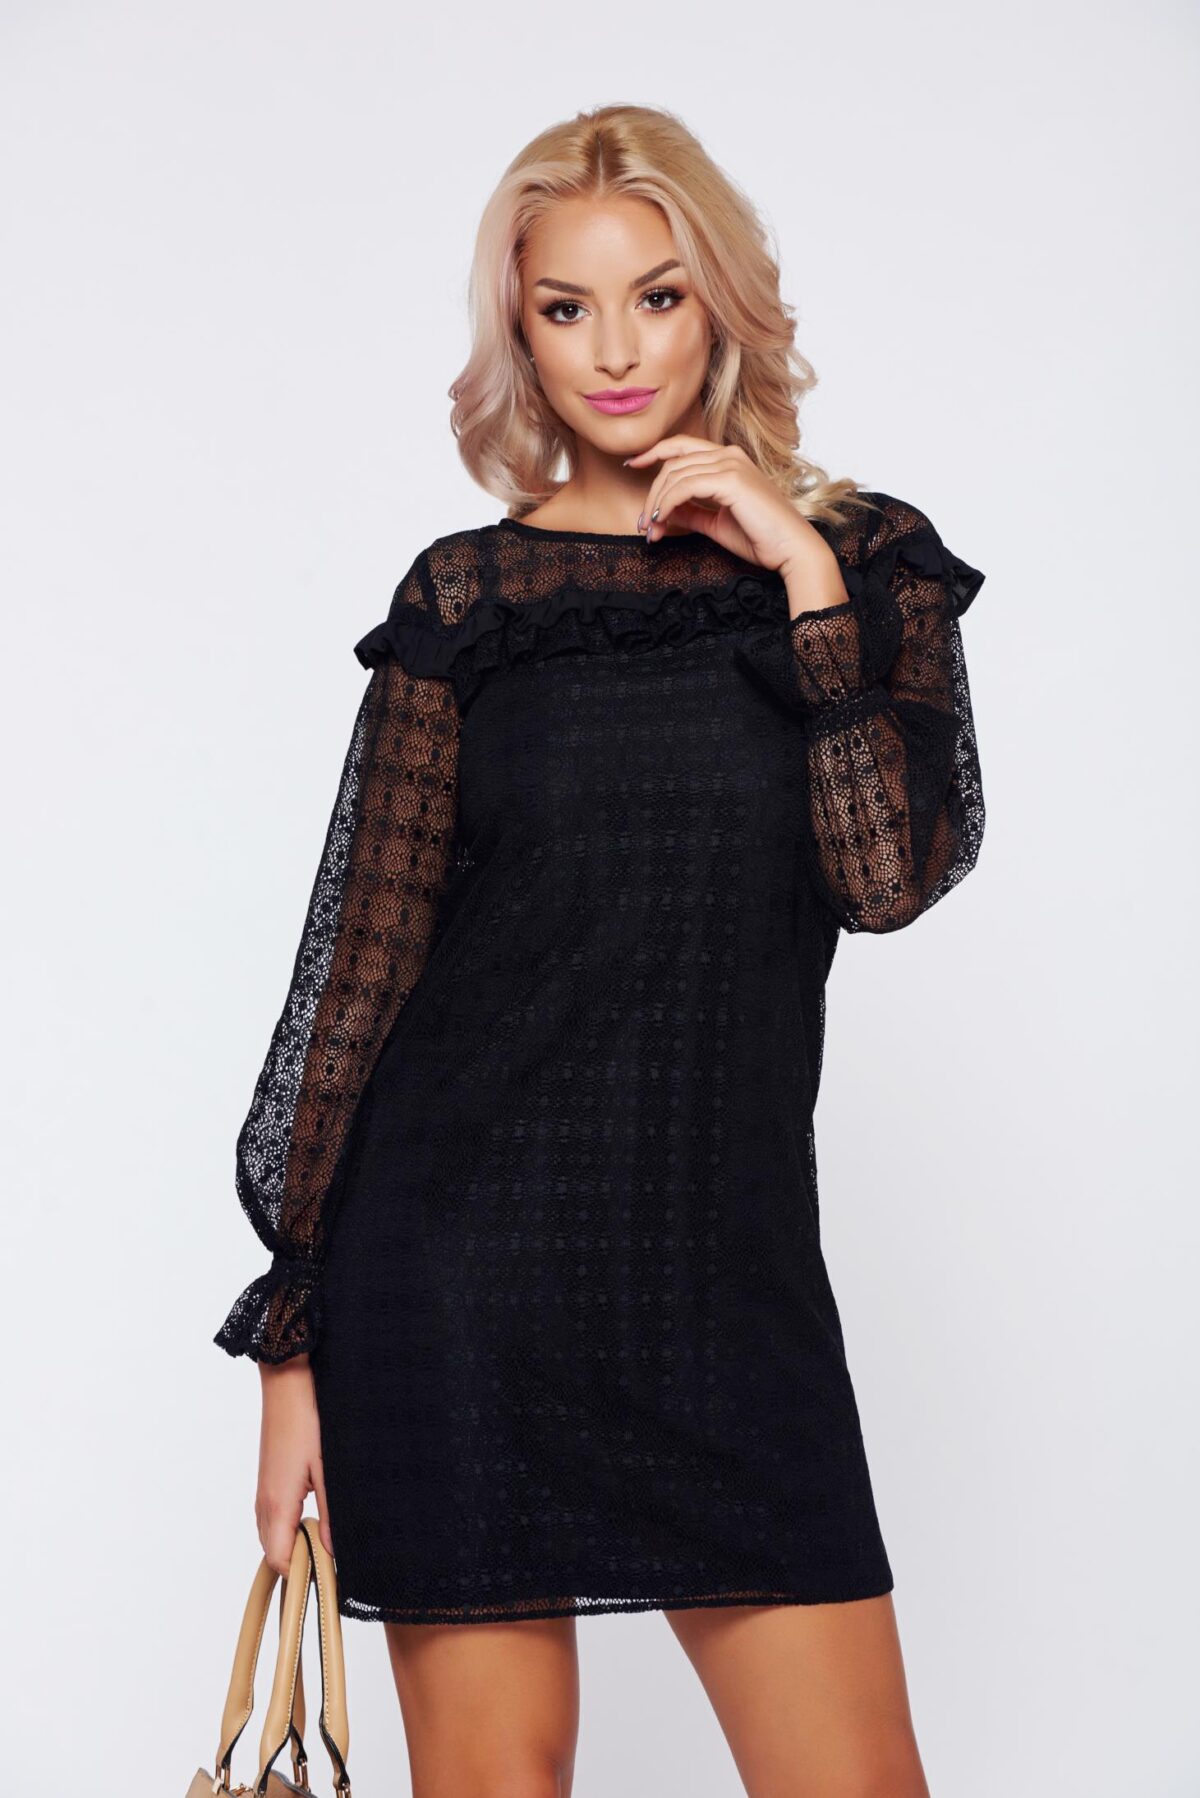 Black elegant laced dress with ruffle details